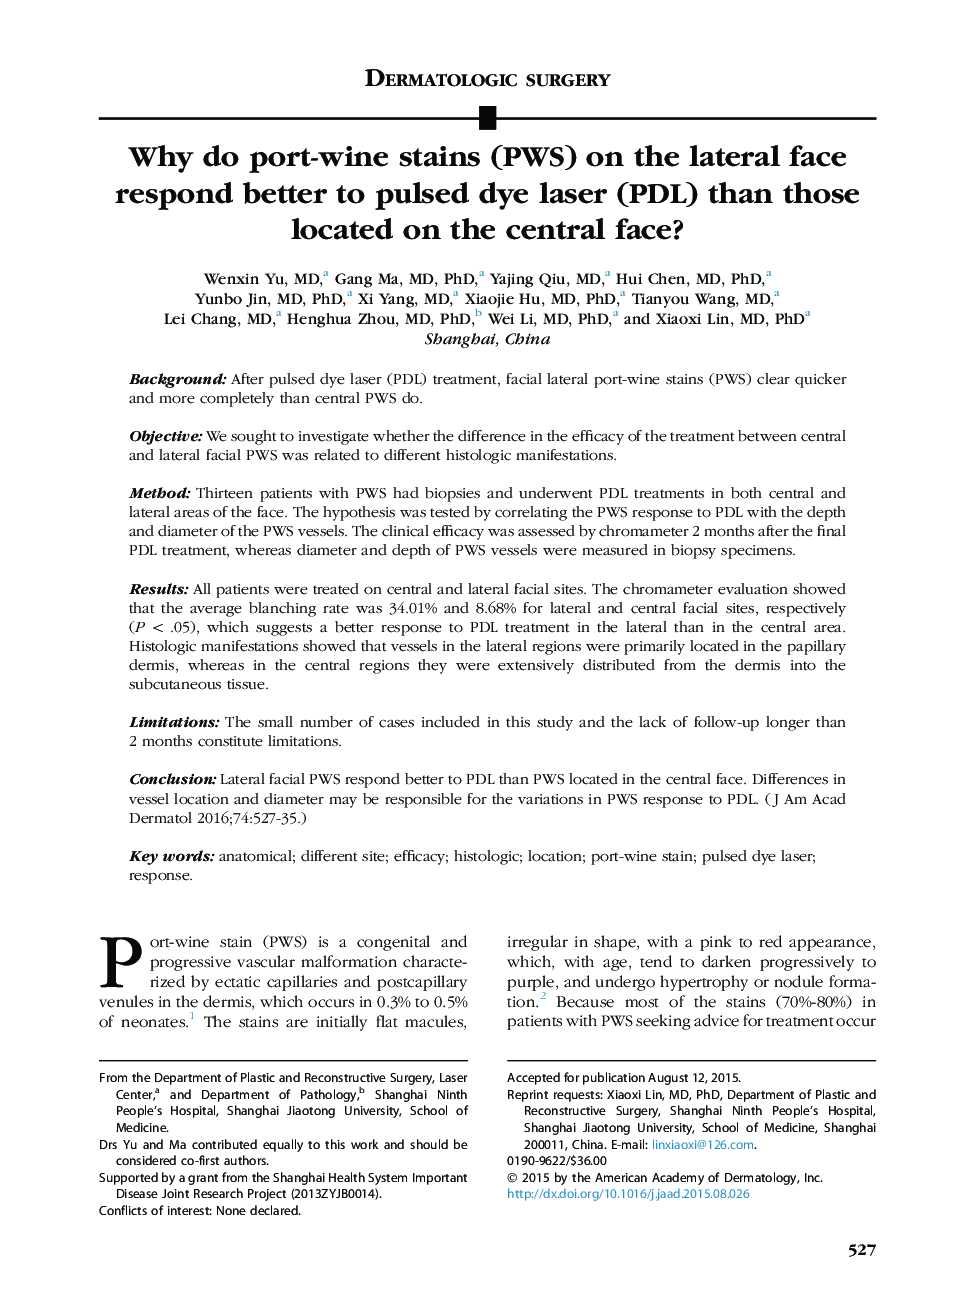 Why do port-wine stains (PWS) on the lateral face respond better to pulsed dye laser (PDL) than those located on the central face?